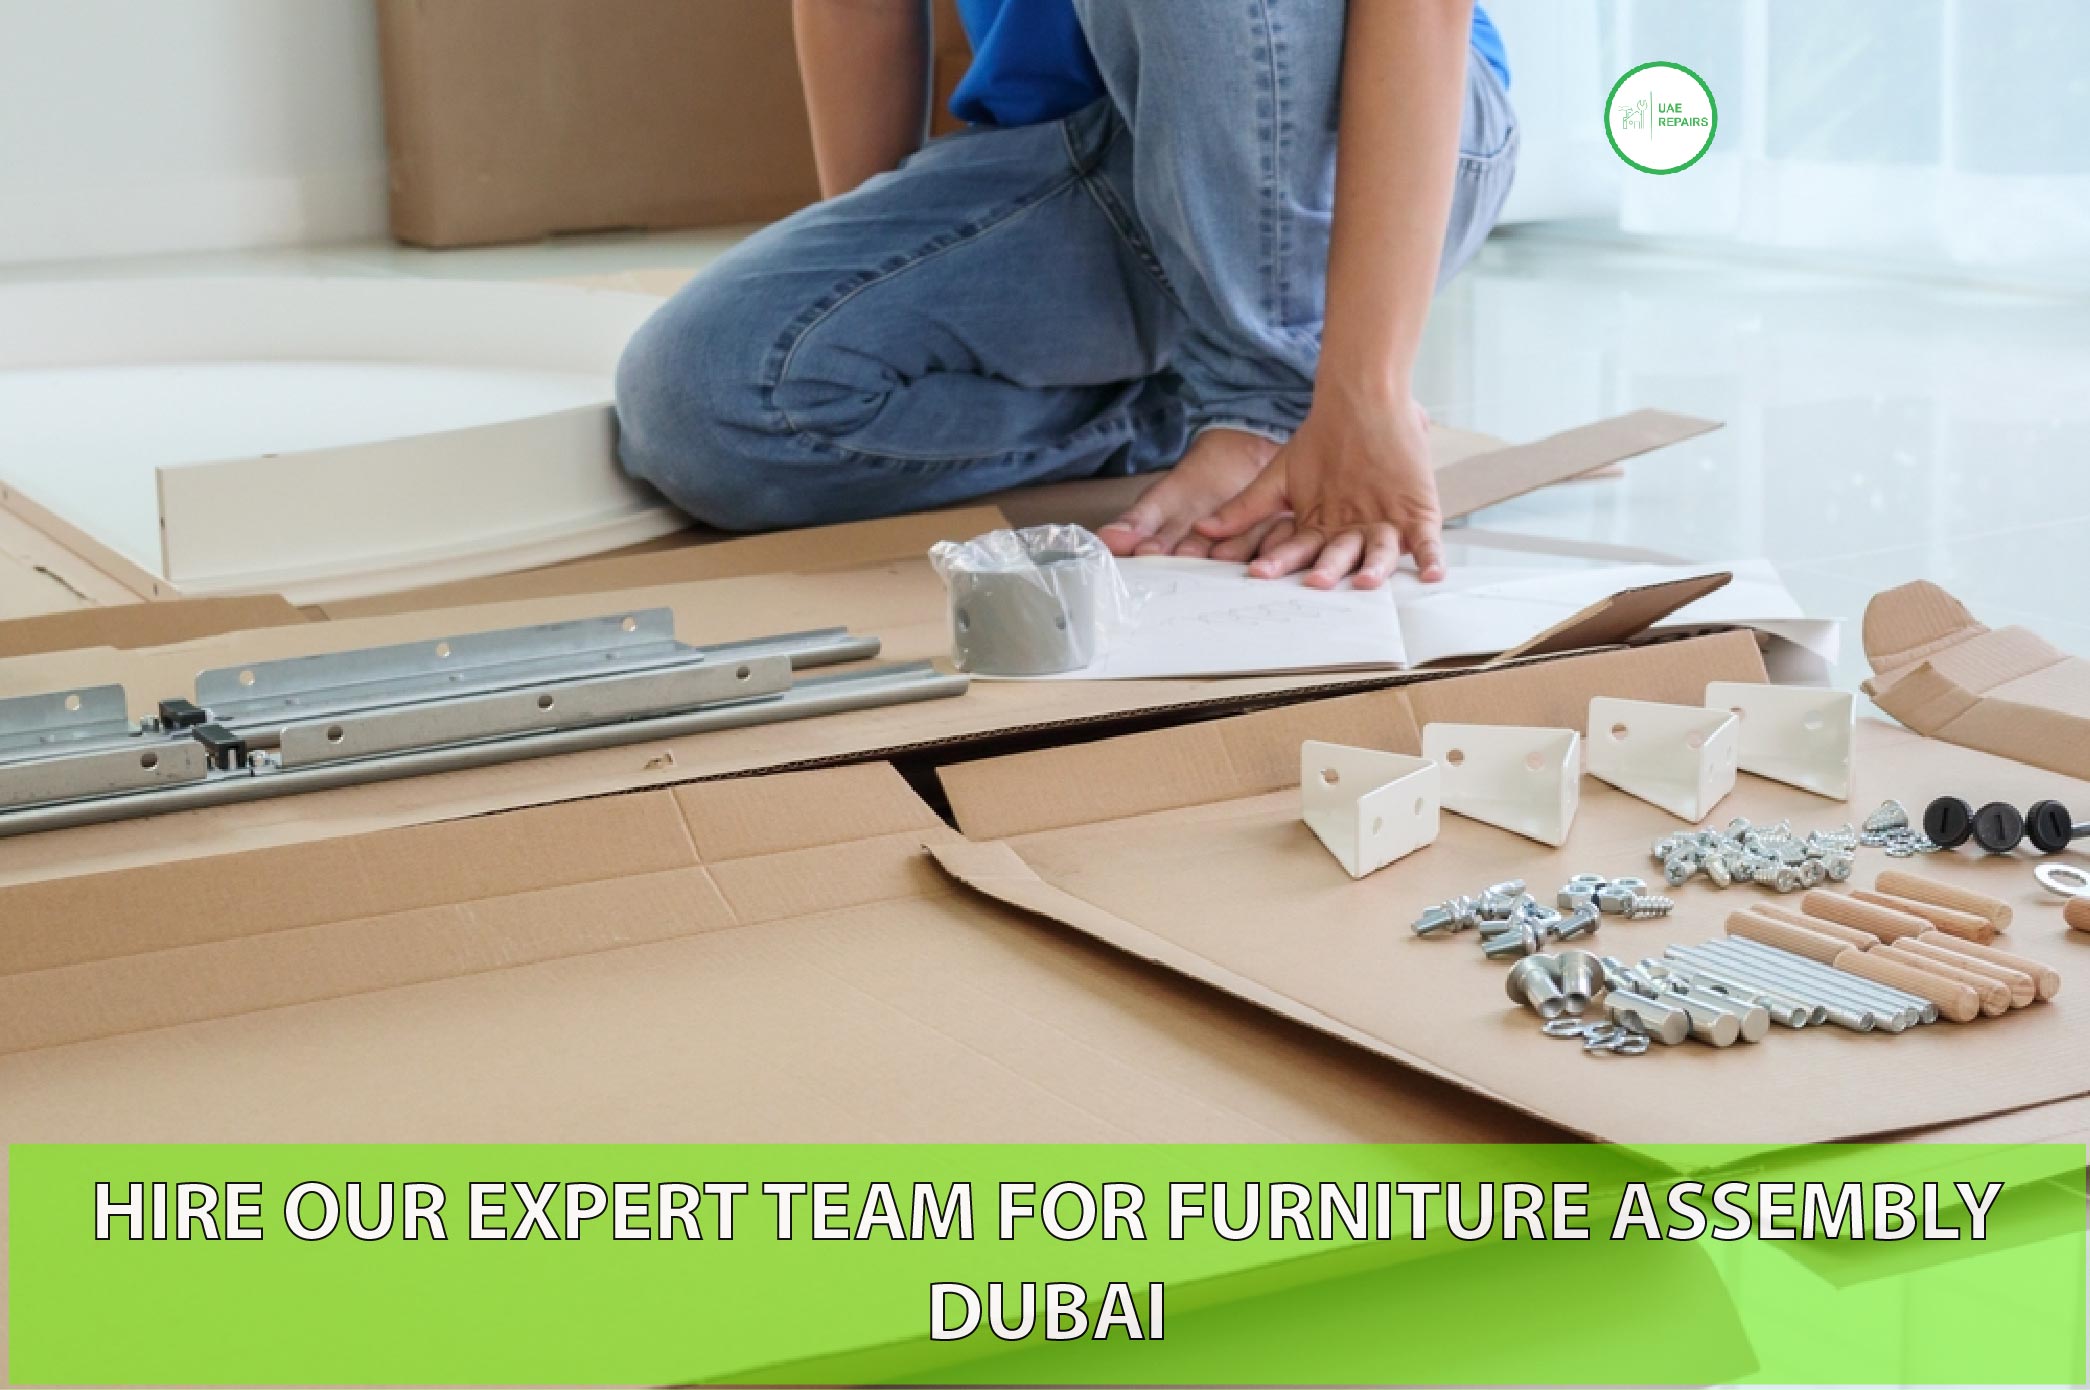 UAE REPAIRS HIRE OUR EXPERT TEAM FURNITURE ASSEMBLY DUBAI CONTACT 0588997516